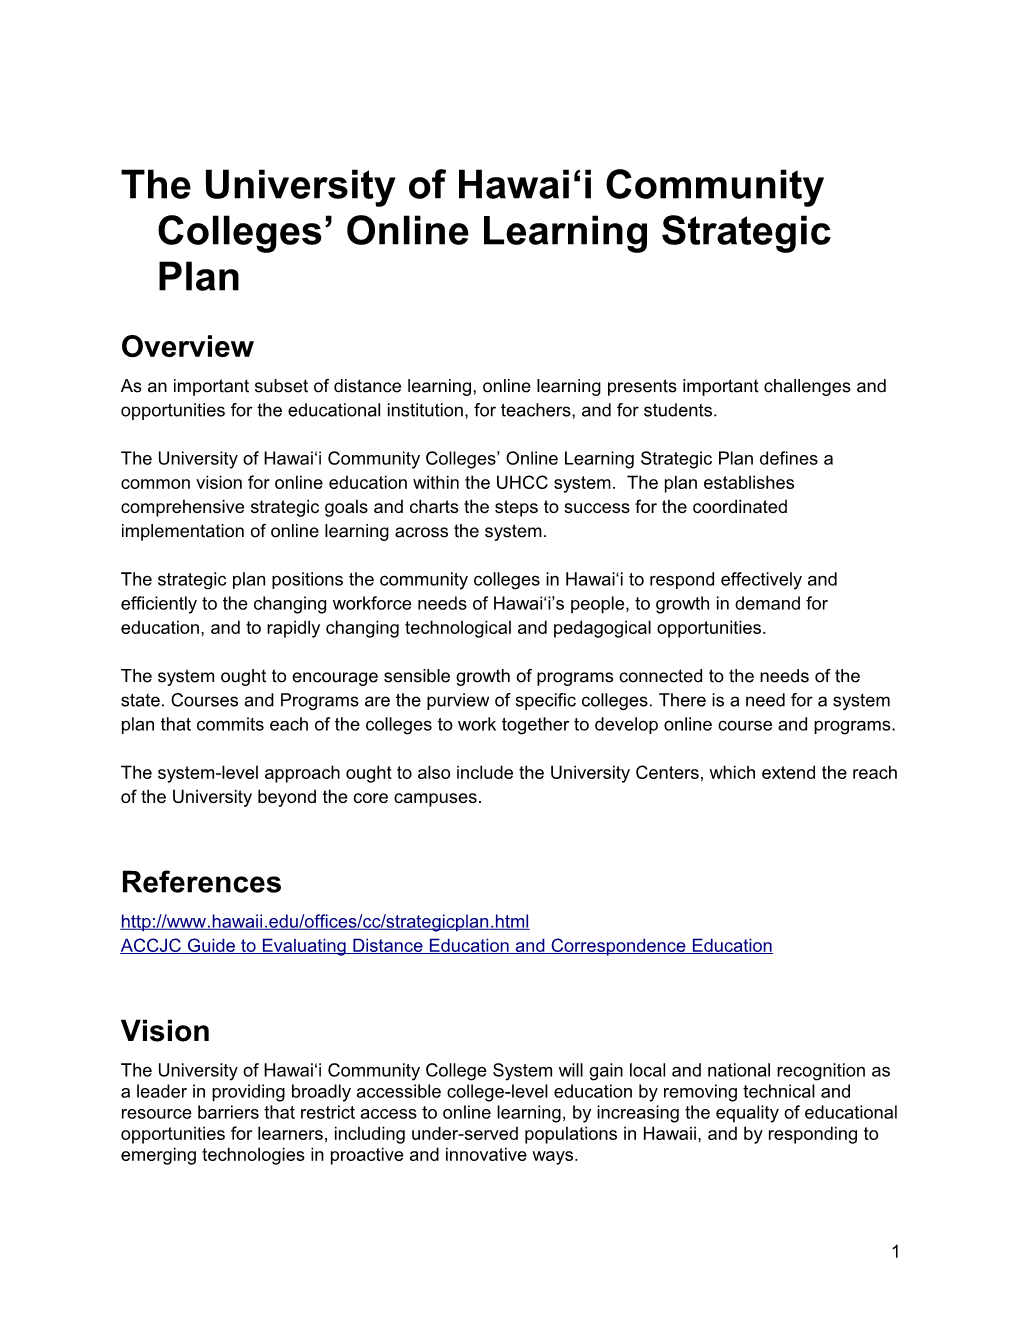 The University of Hawai I Community Colleges Online Learning Strategic Plan